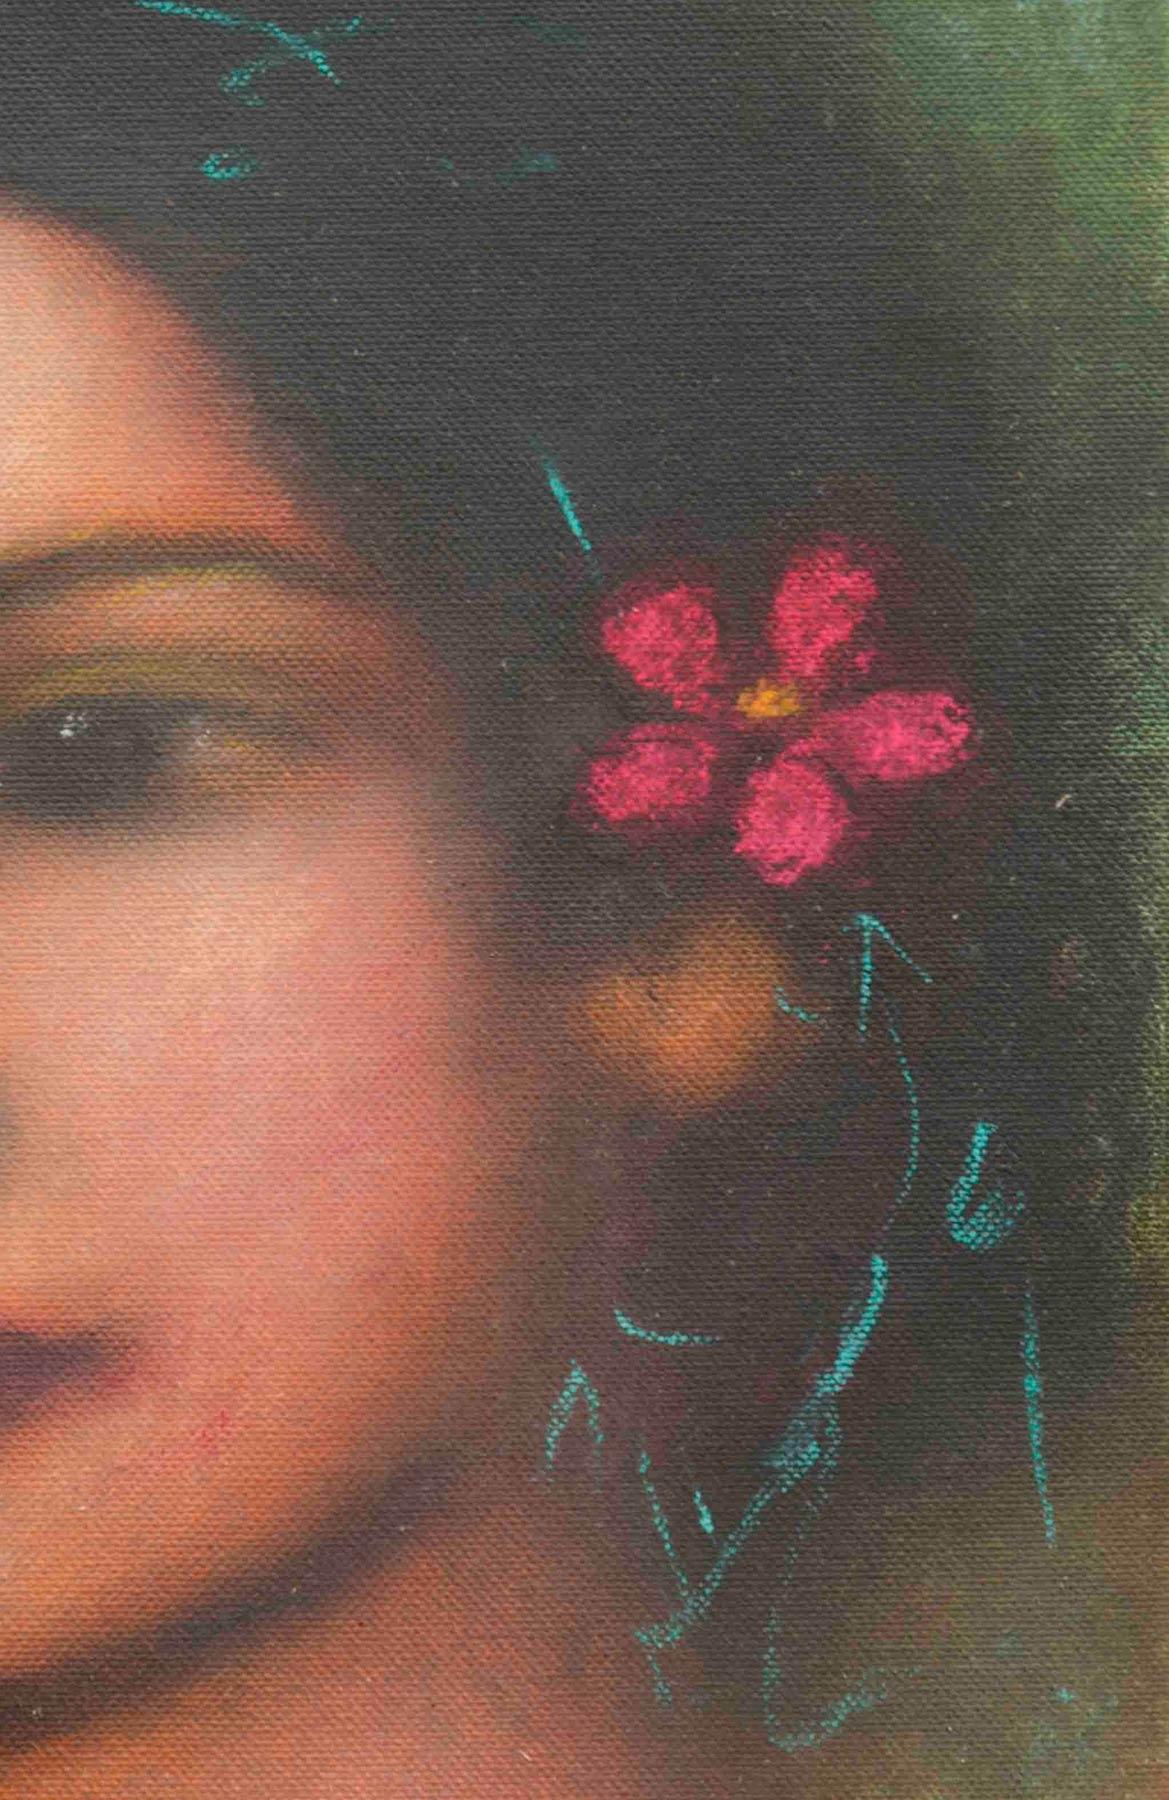 Radha, Mysterious, Ethereal, Godlike, Oil on Canvas by Indian Artist 